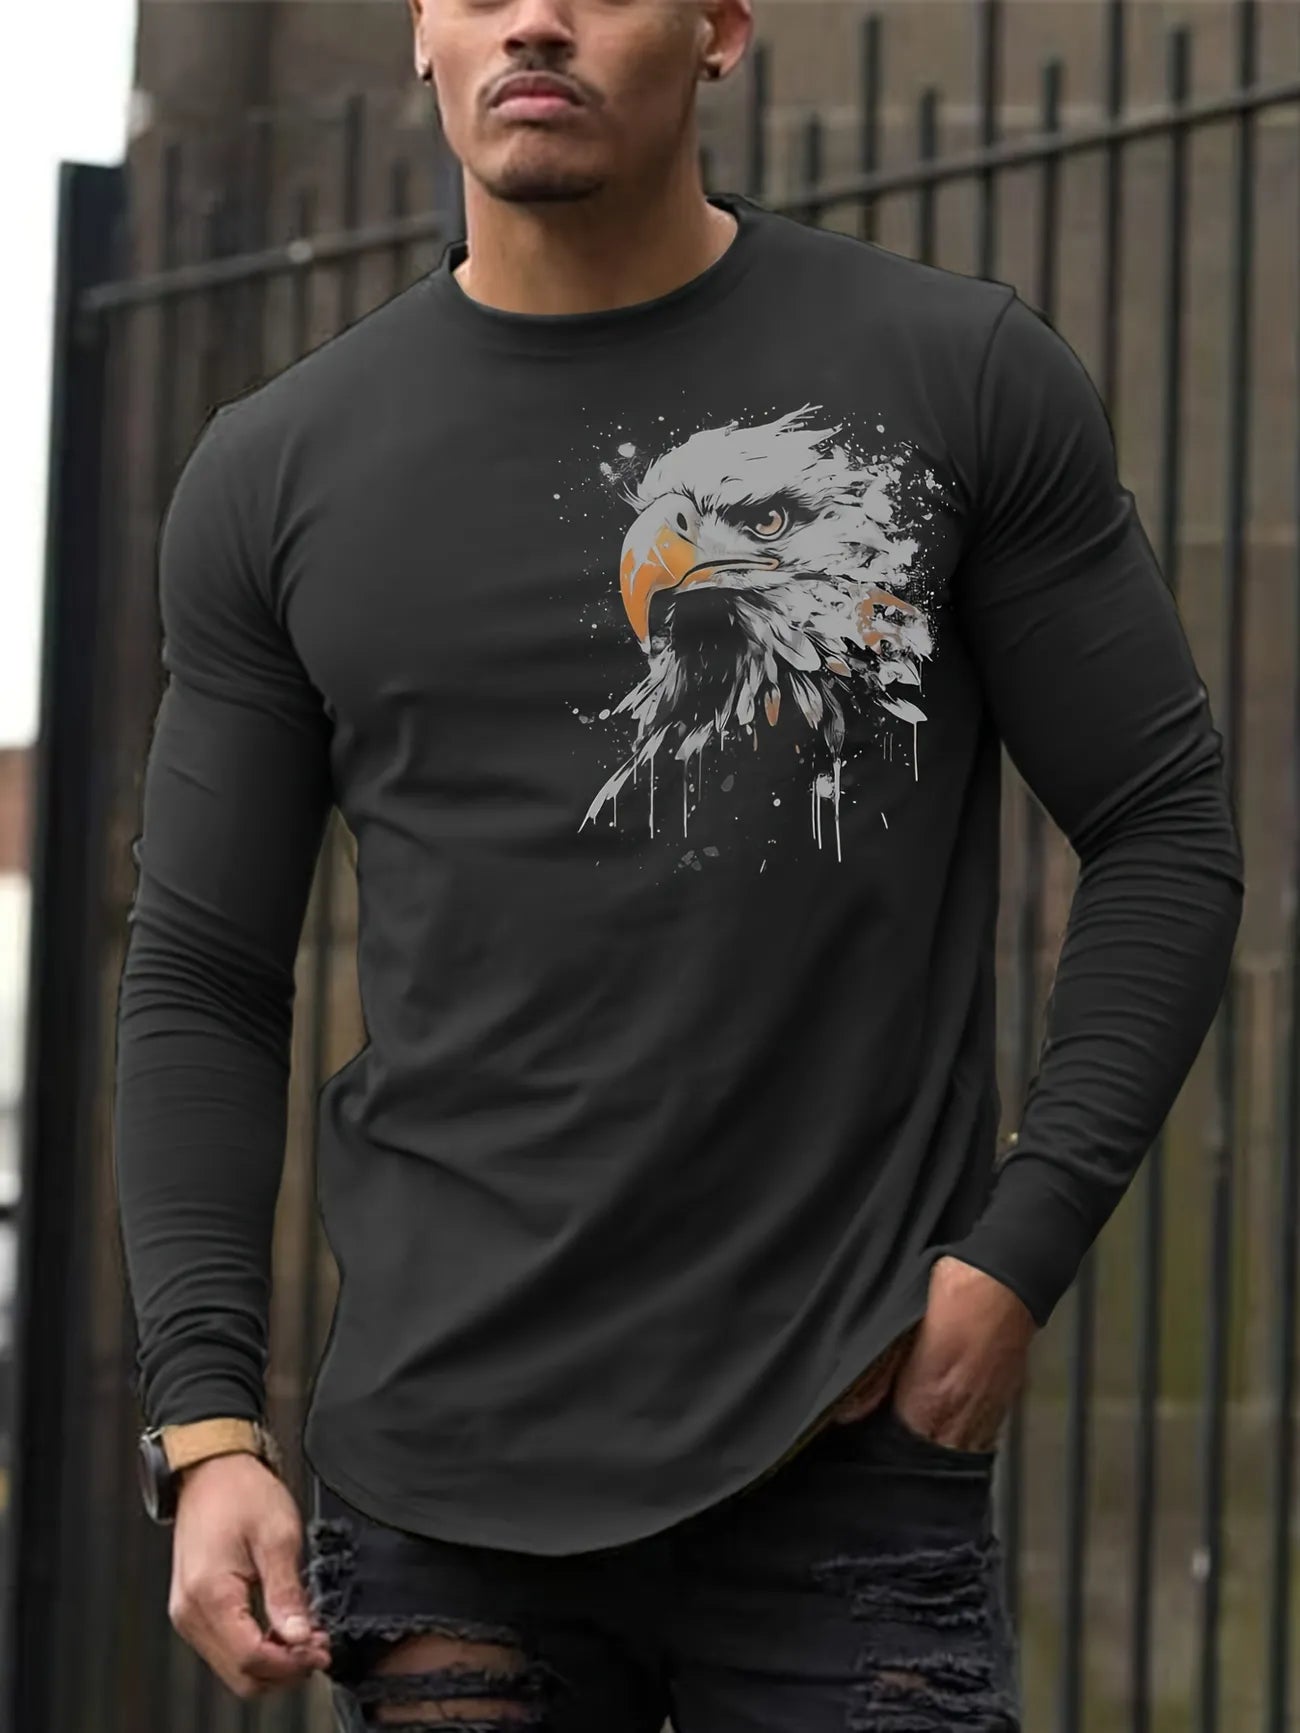 Mens Cotton Sticker Printed Long Sleeve T-Shirt by Tee Tall LSTTMPS5 - Charcoal